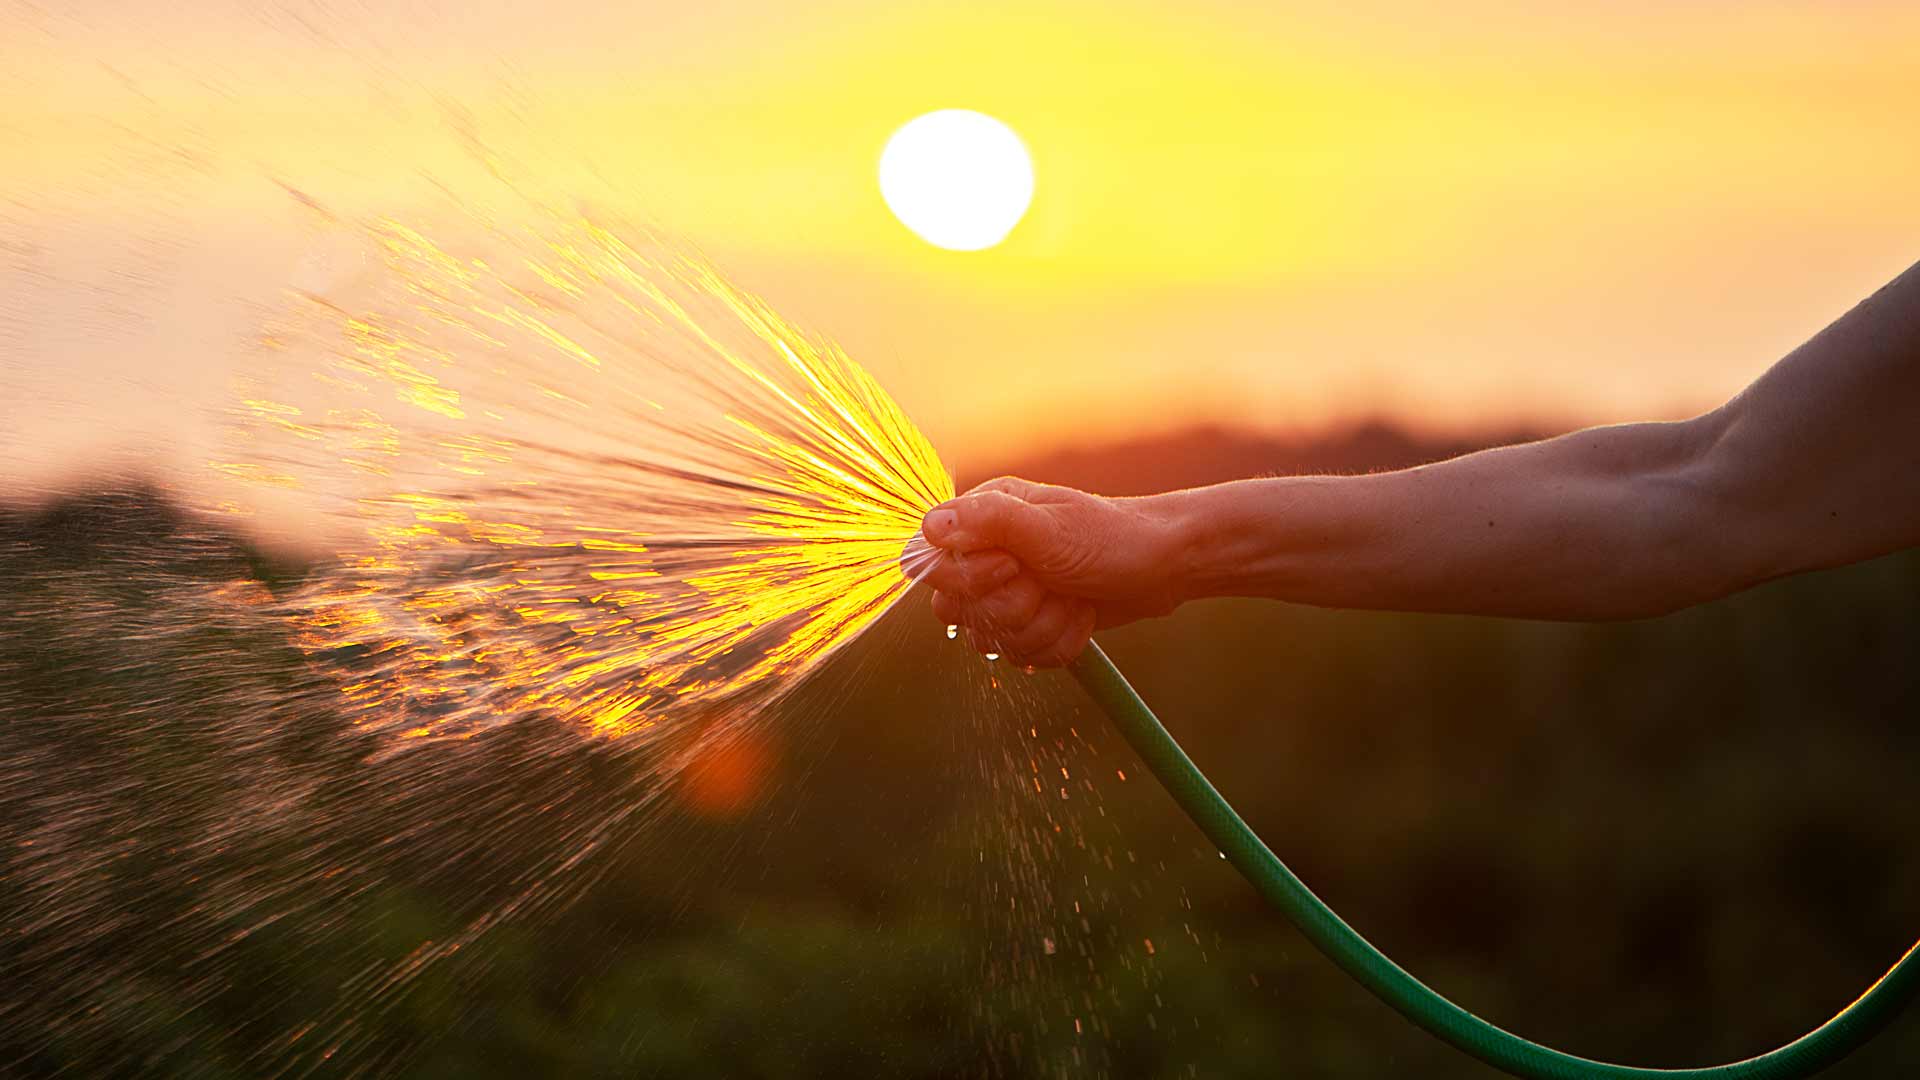 Garden Hose Dilemma: Structured Water to the Rescue